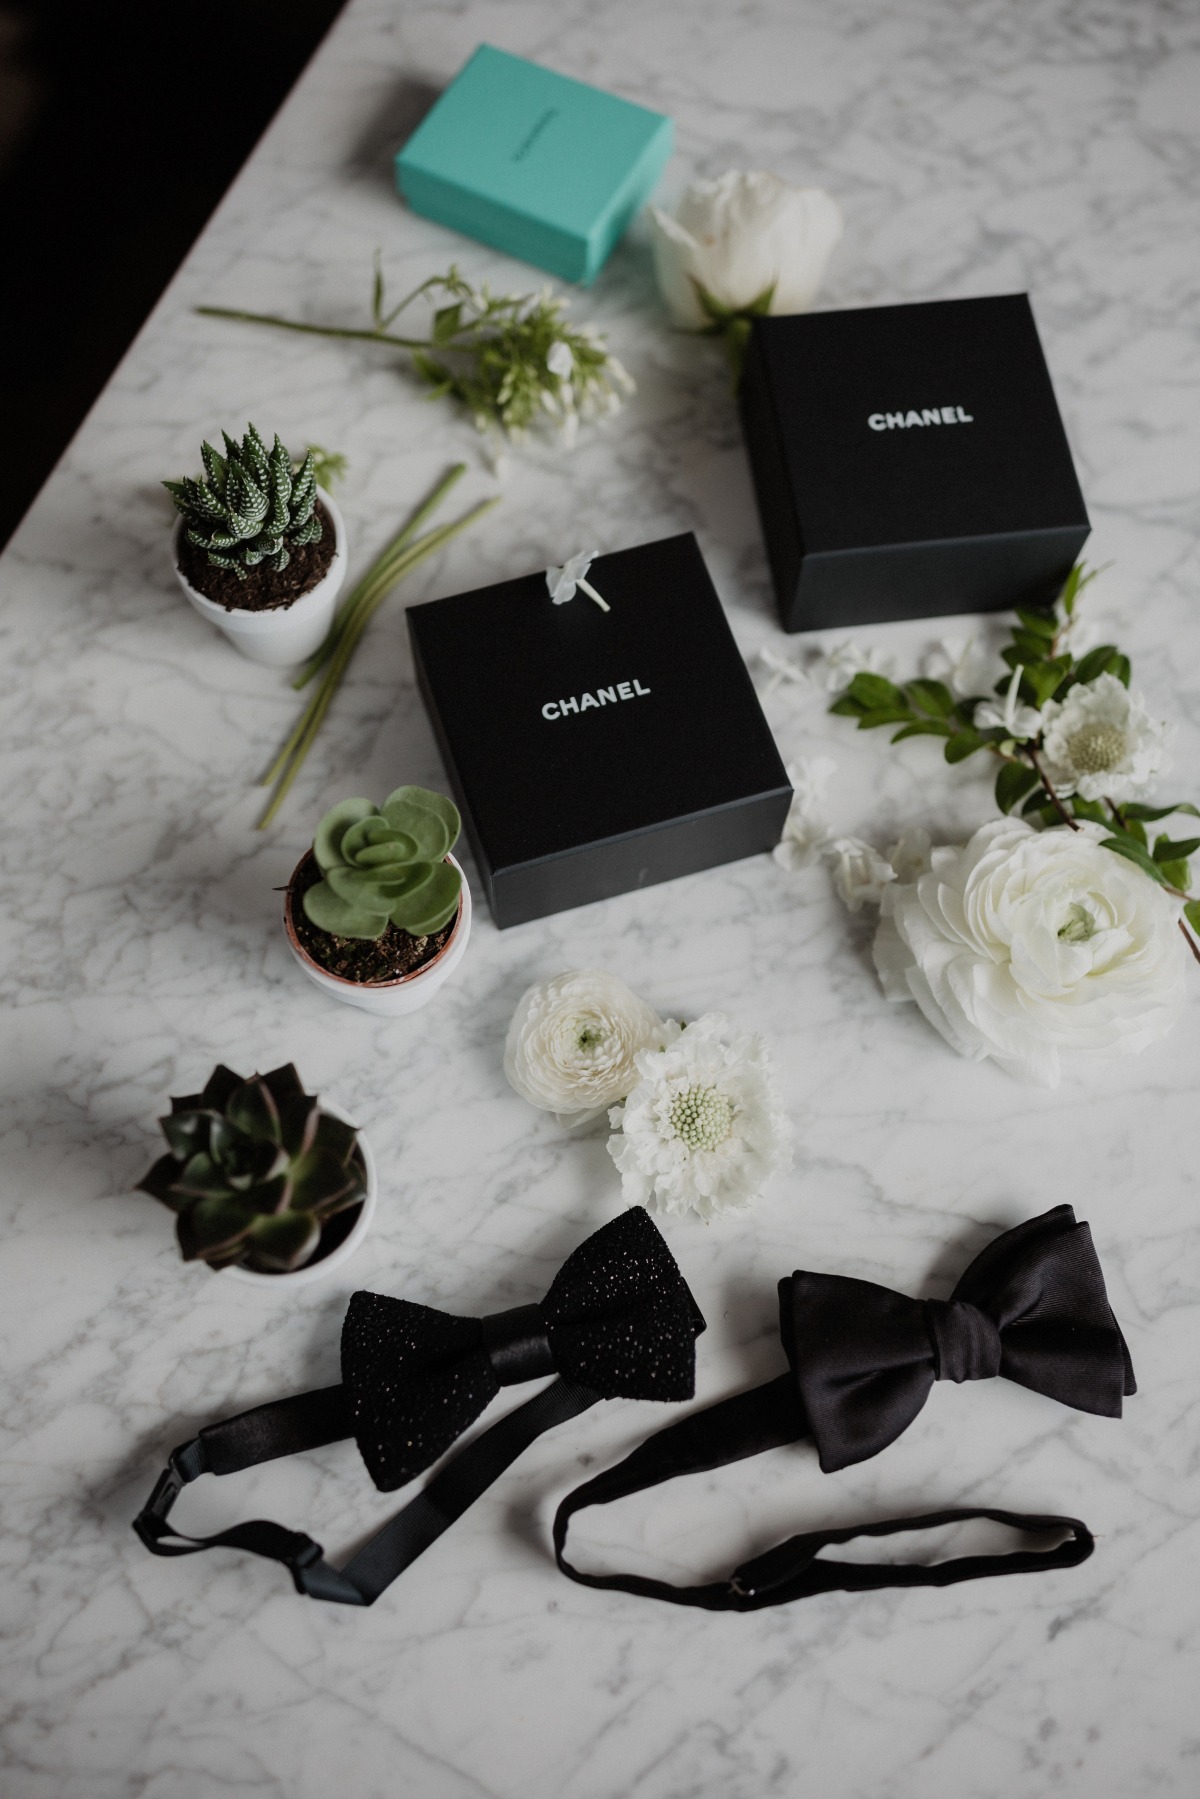 Chanel and succulent wedding details